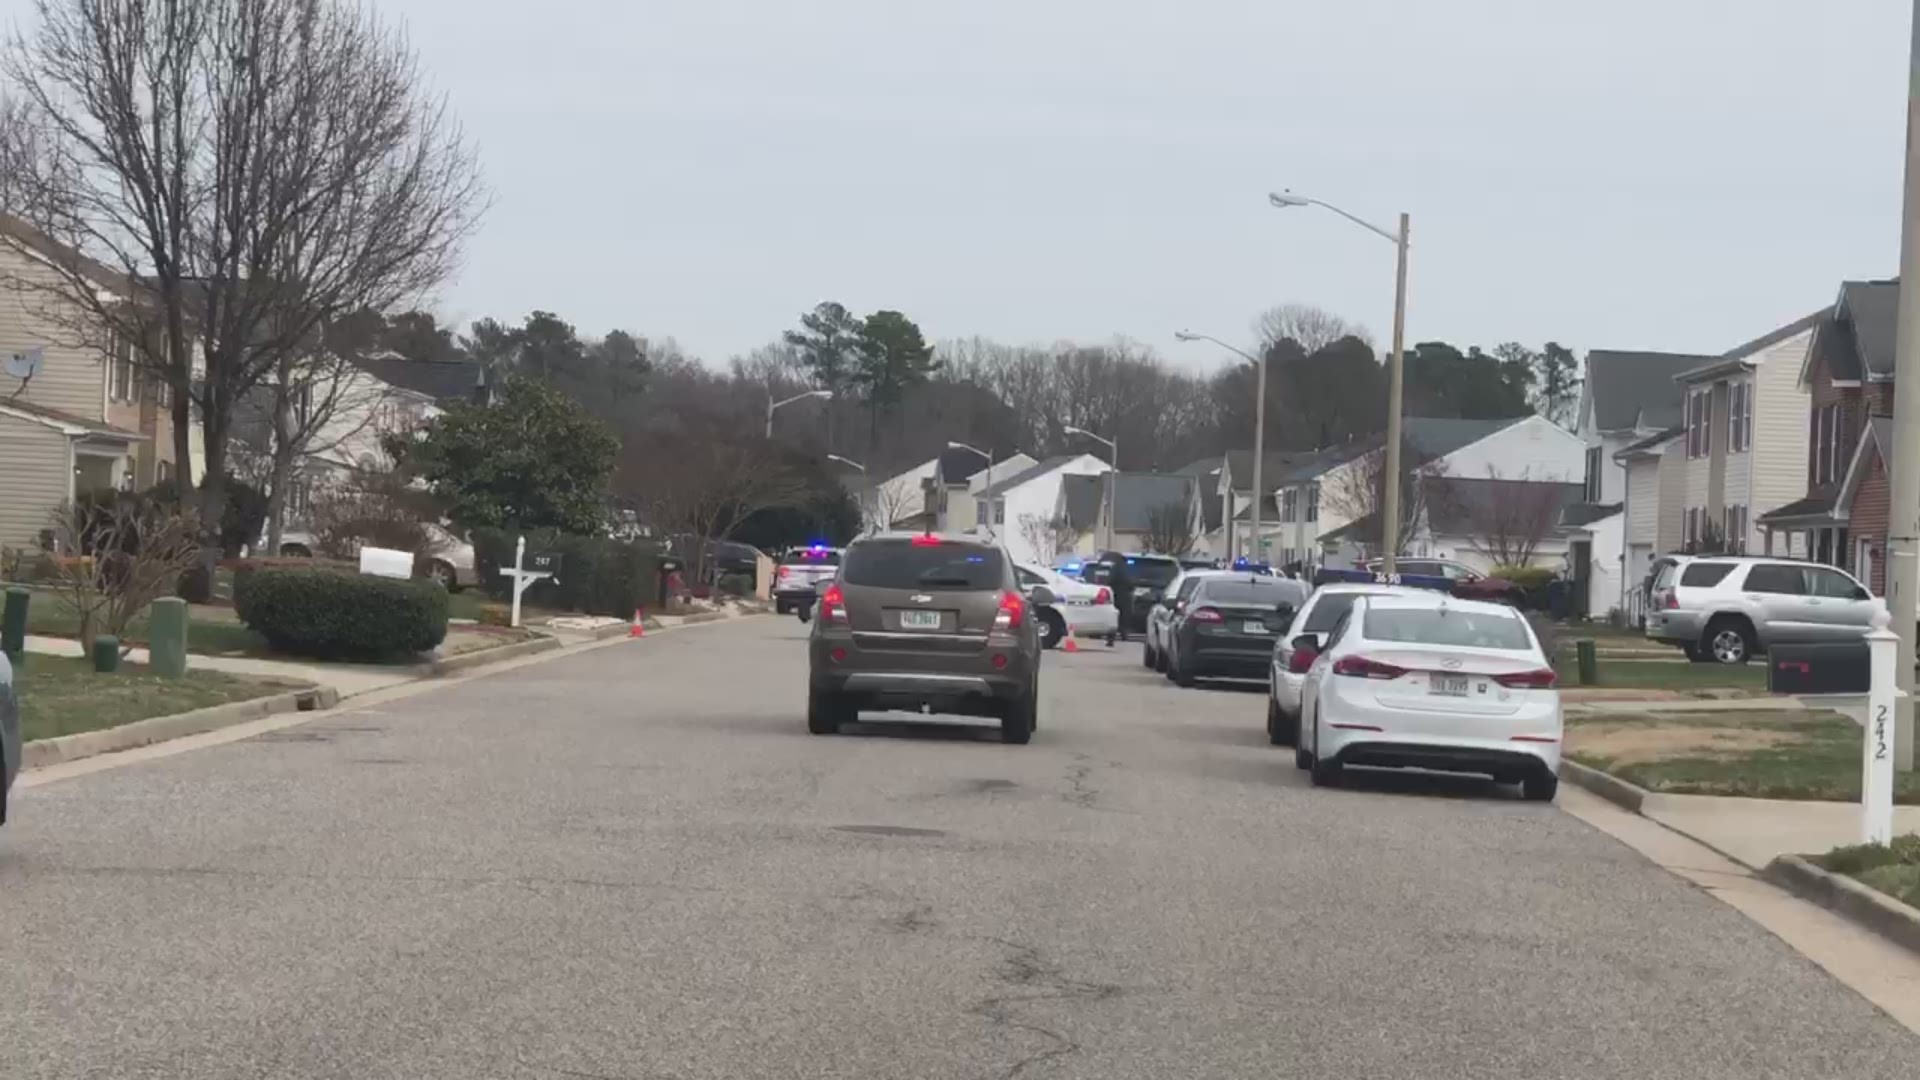 Video shows a heavy police presence in Newport News in the 200 block of Cabell Drive. A man and a woman were found with serious gunshot wounds inside a home.